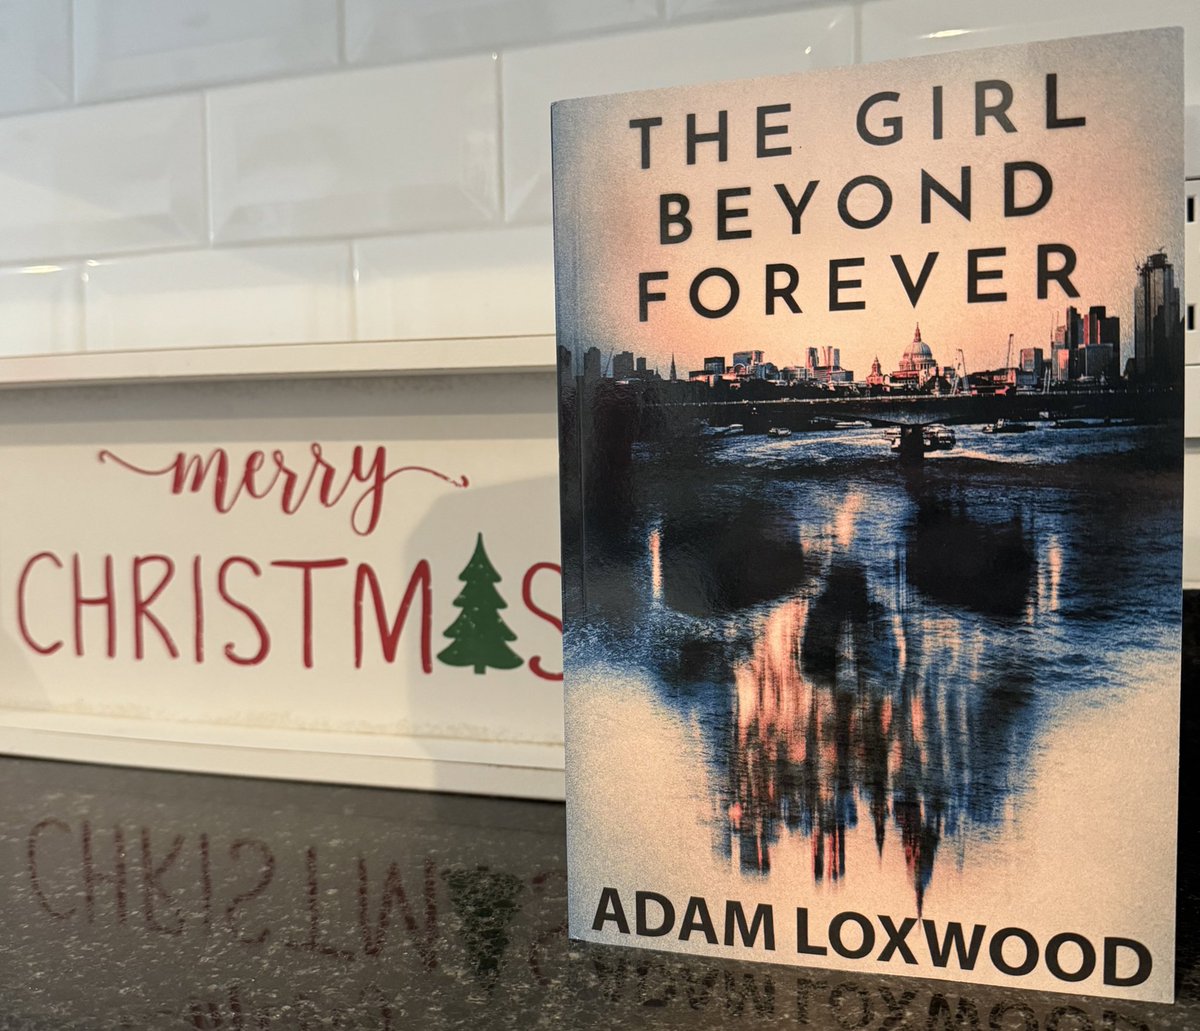 Choosing the first and last book of any calendar year is something I take seriously. I’m weird like that.

This is a solid choice to wrap up 2023. It was my Xmas gift to myself.

@BestThrillBooks I’ll even write a review! 😂

#TheGirlBeyondForever #AdamLoxwood